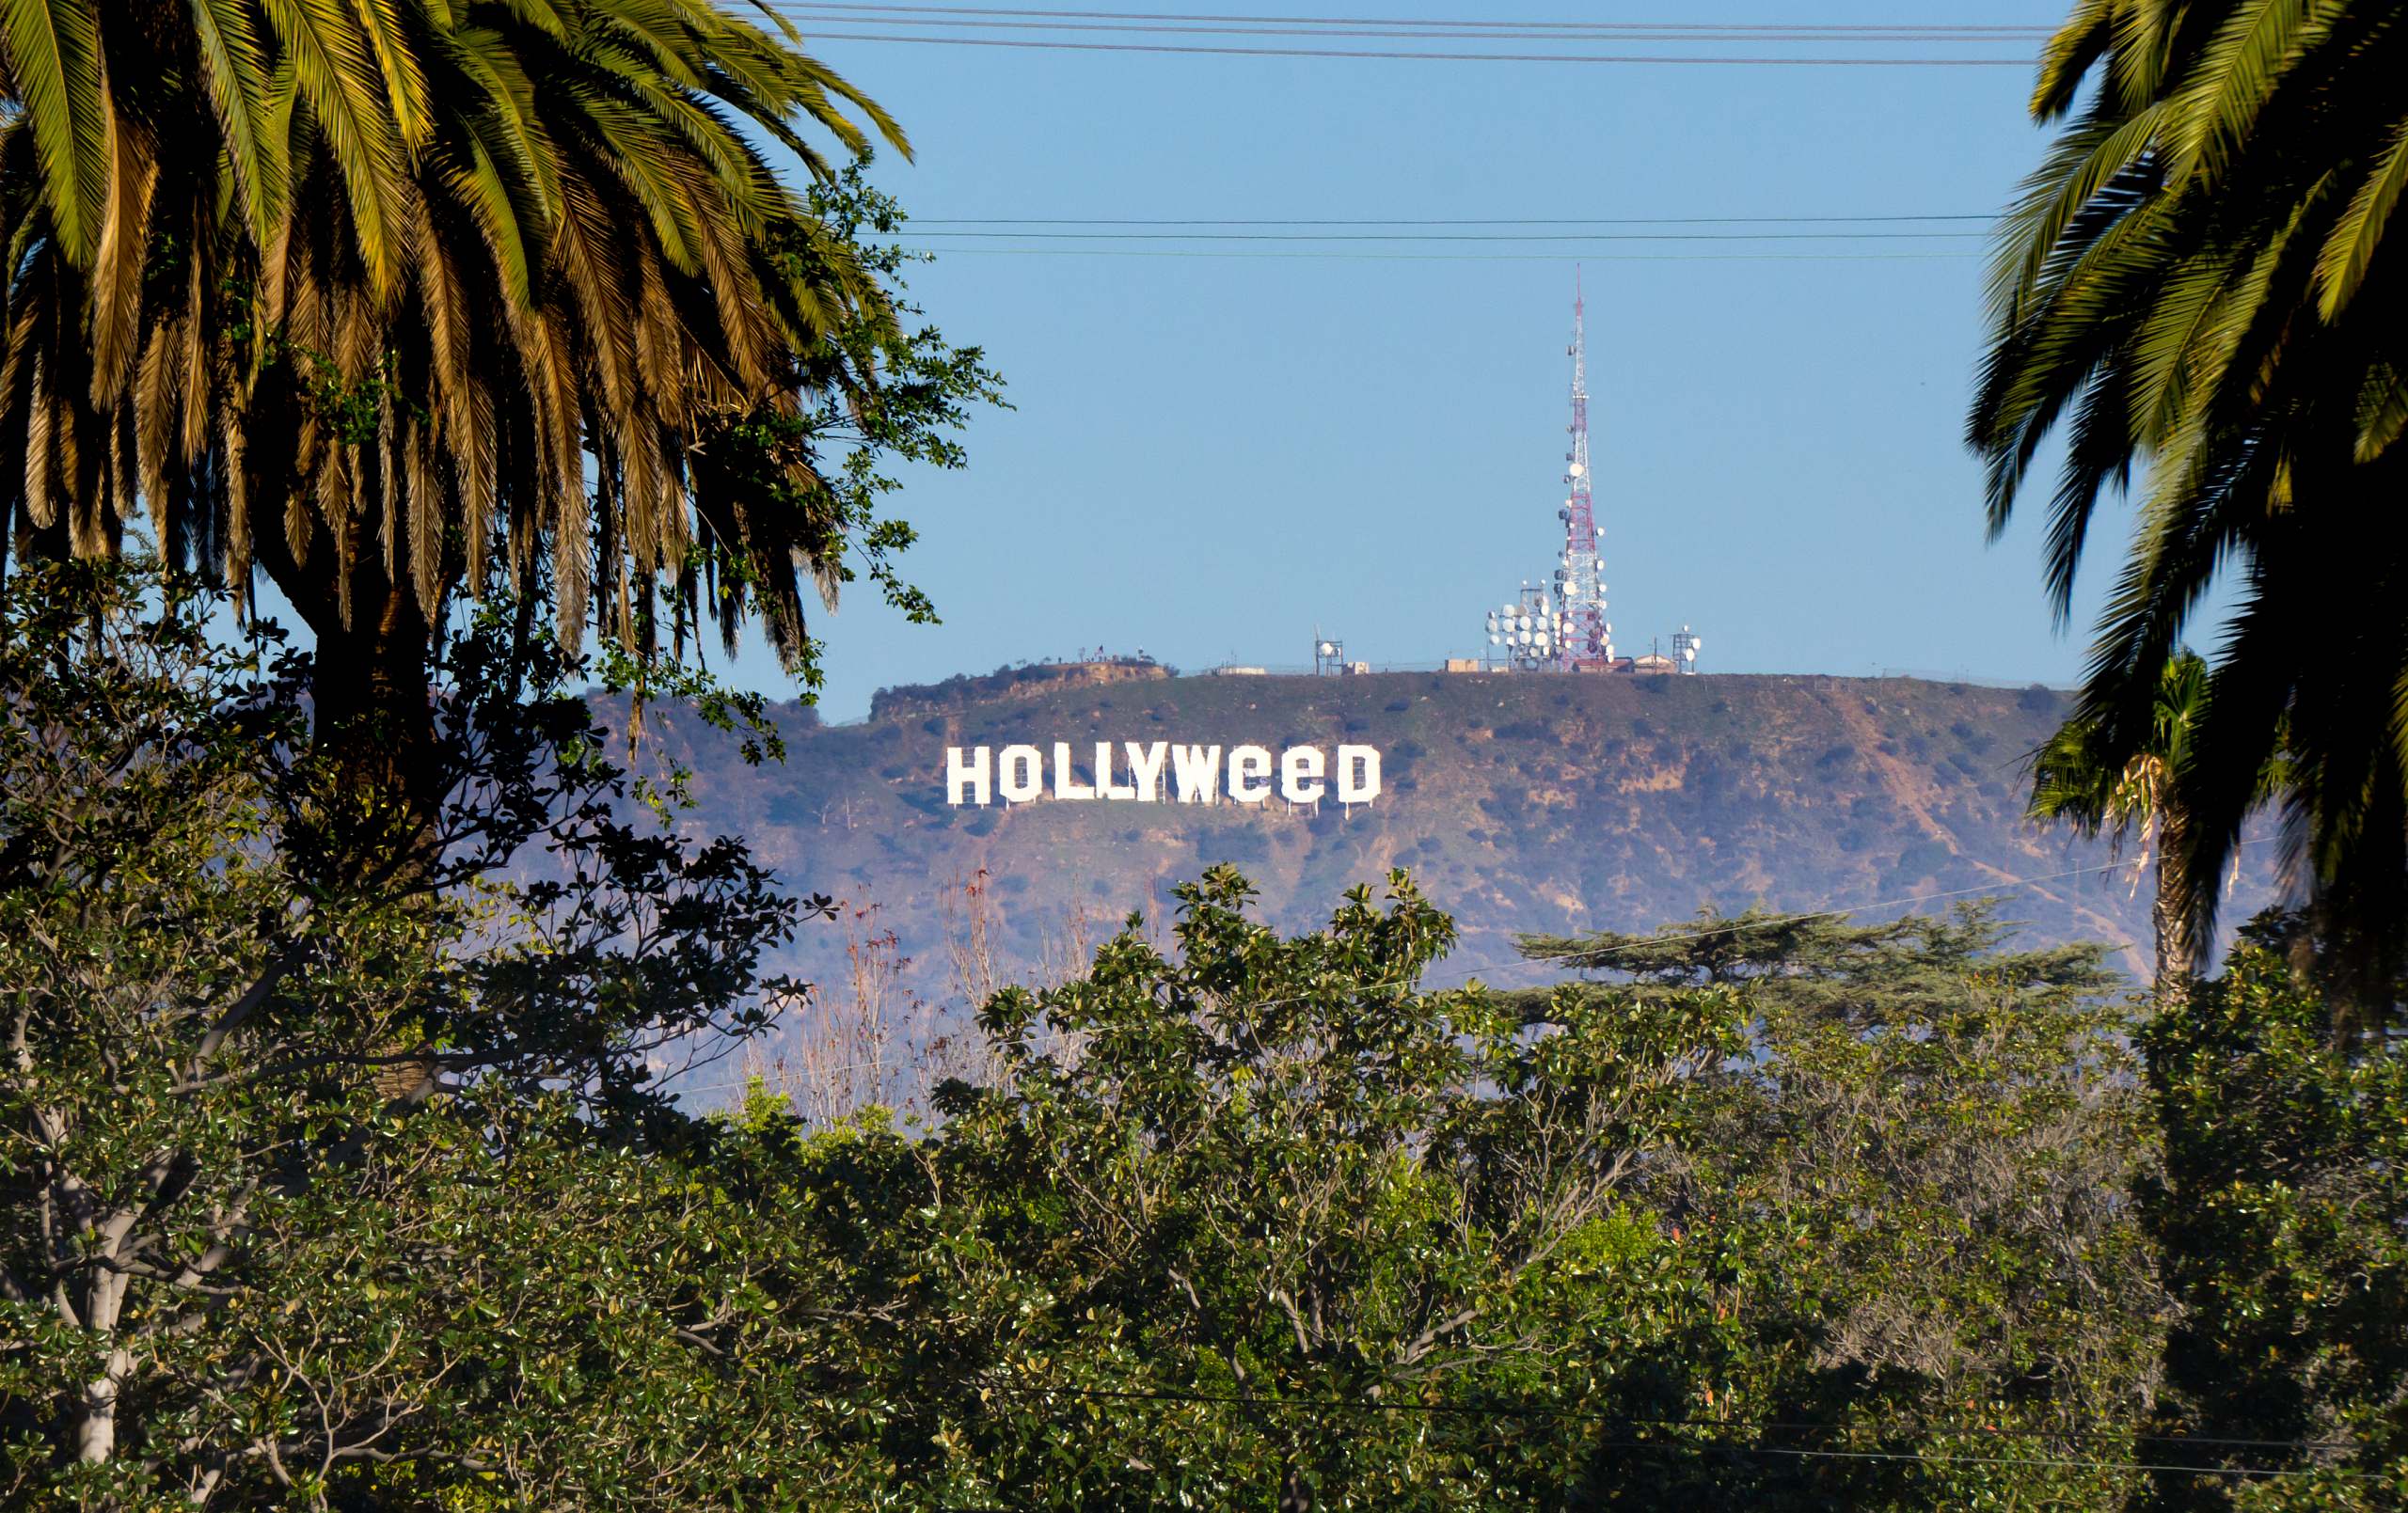 Hollywood sign with weed instead of wood